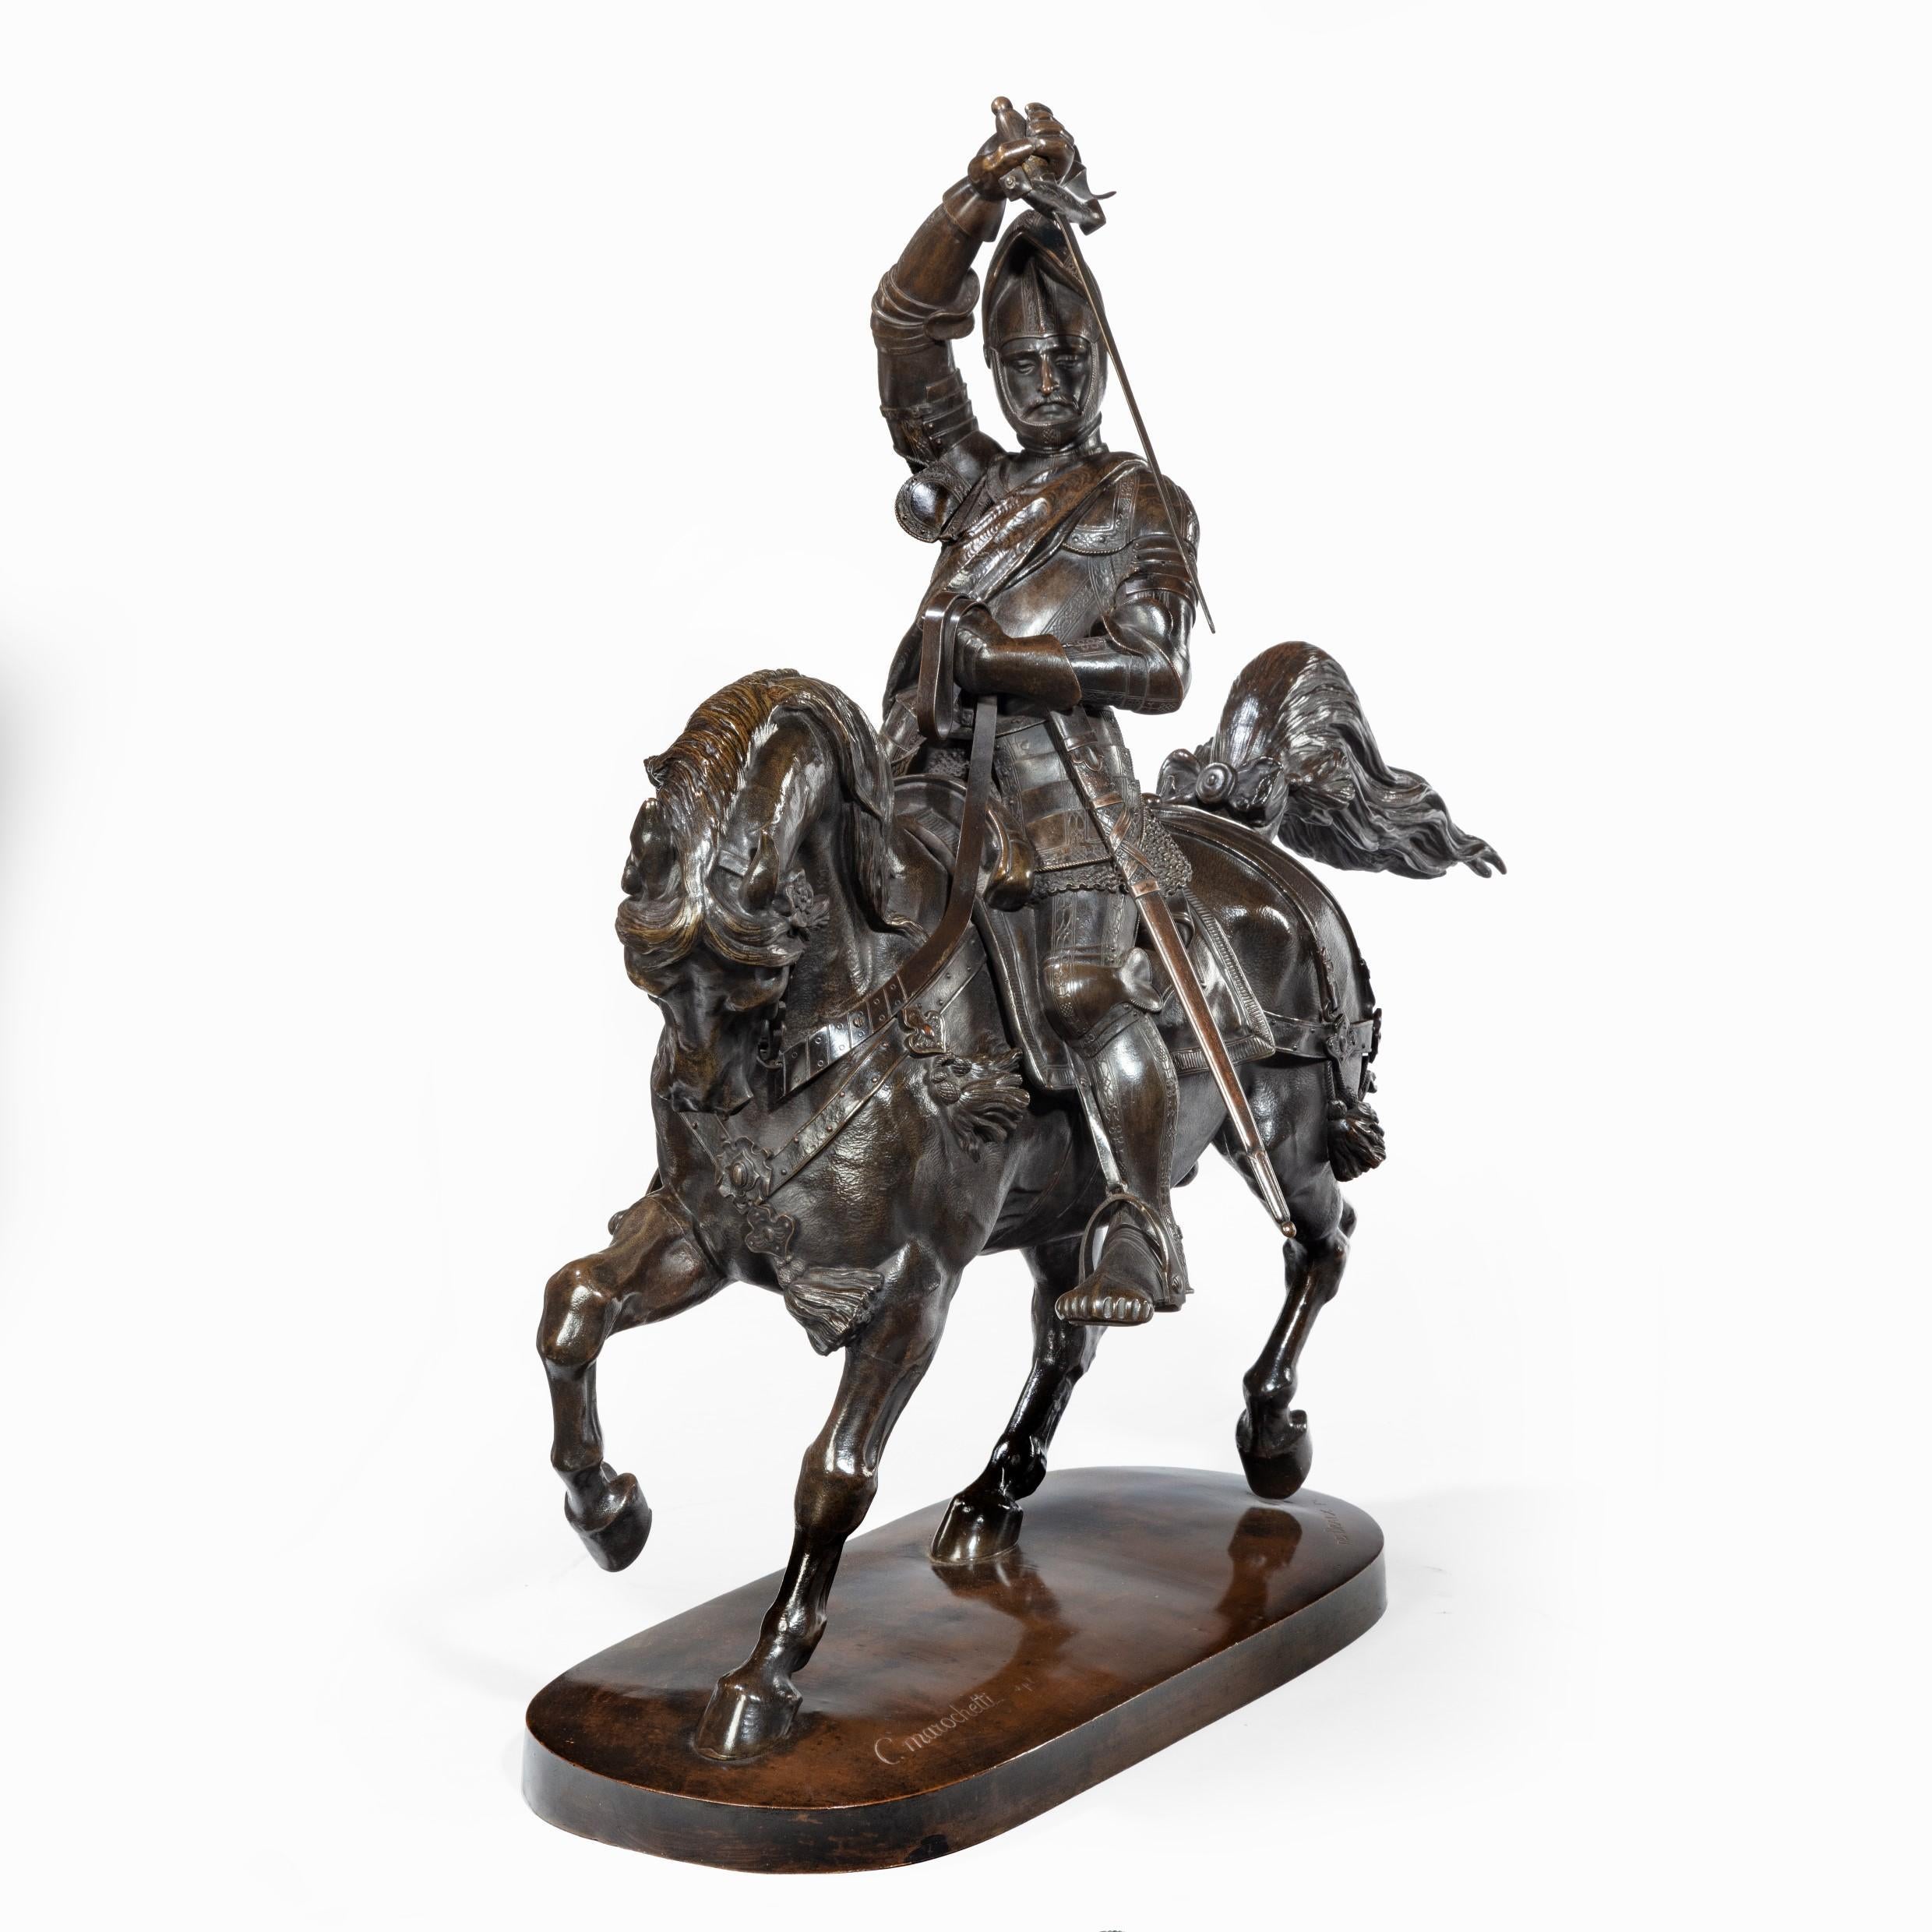 An Italian bronze equestrian sculpture of Emanuele Filiberto, Duke of Savoia, by Baron Carlo Marochetti, the duke wearing full armour with the visor of his helmet up and drawing his sword in front of his face, riding a prancing horse, the base